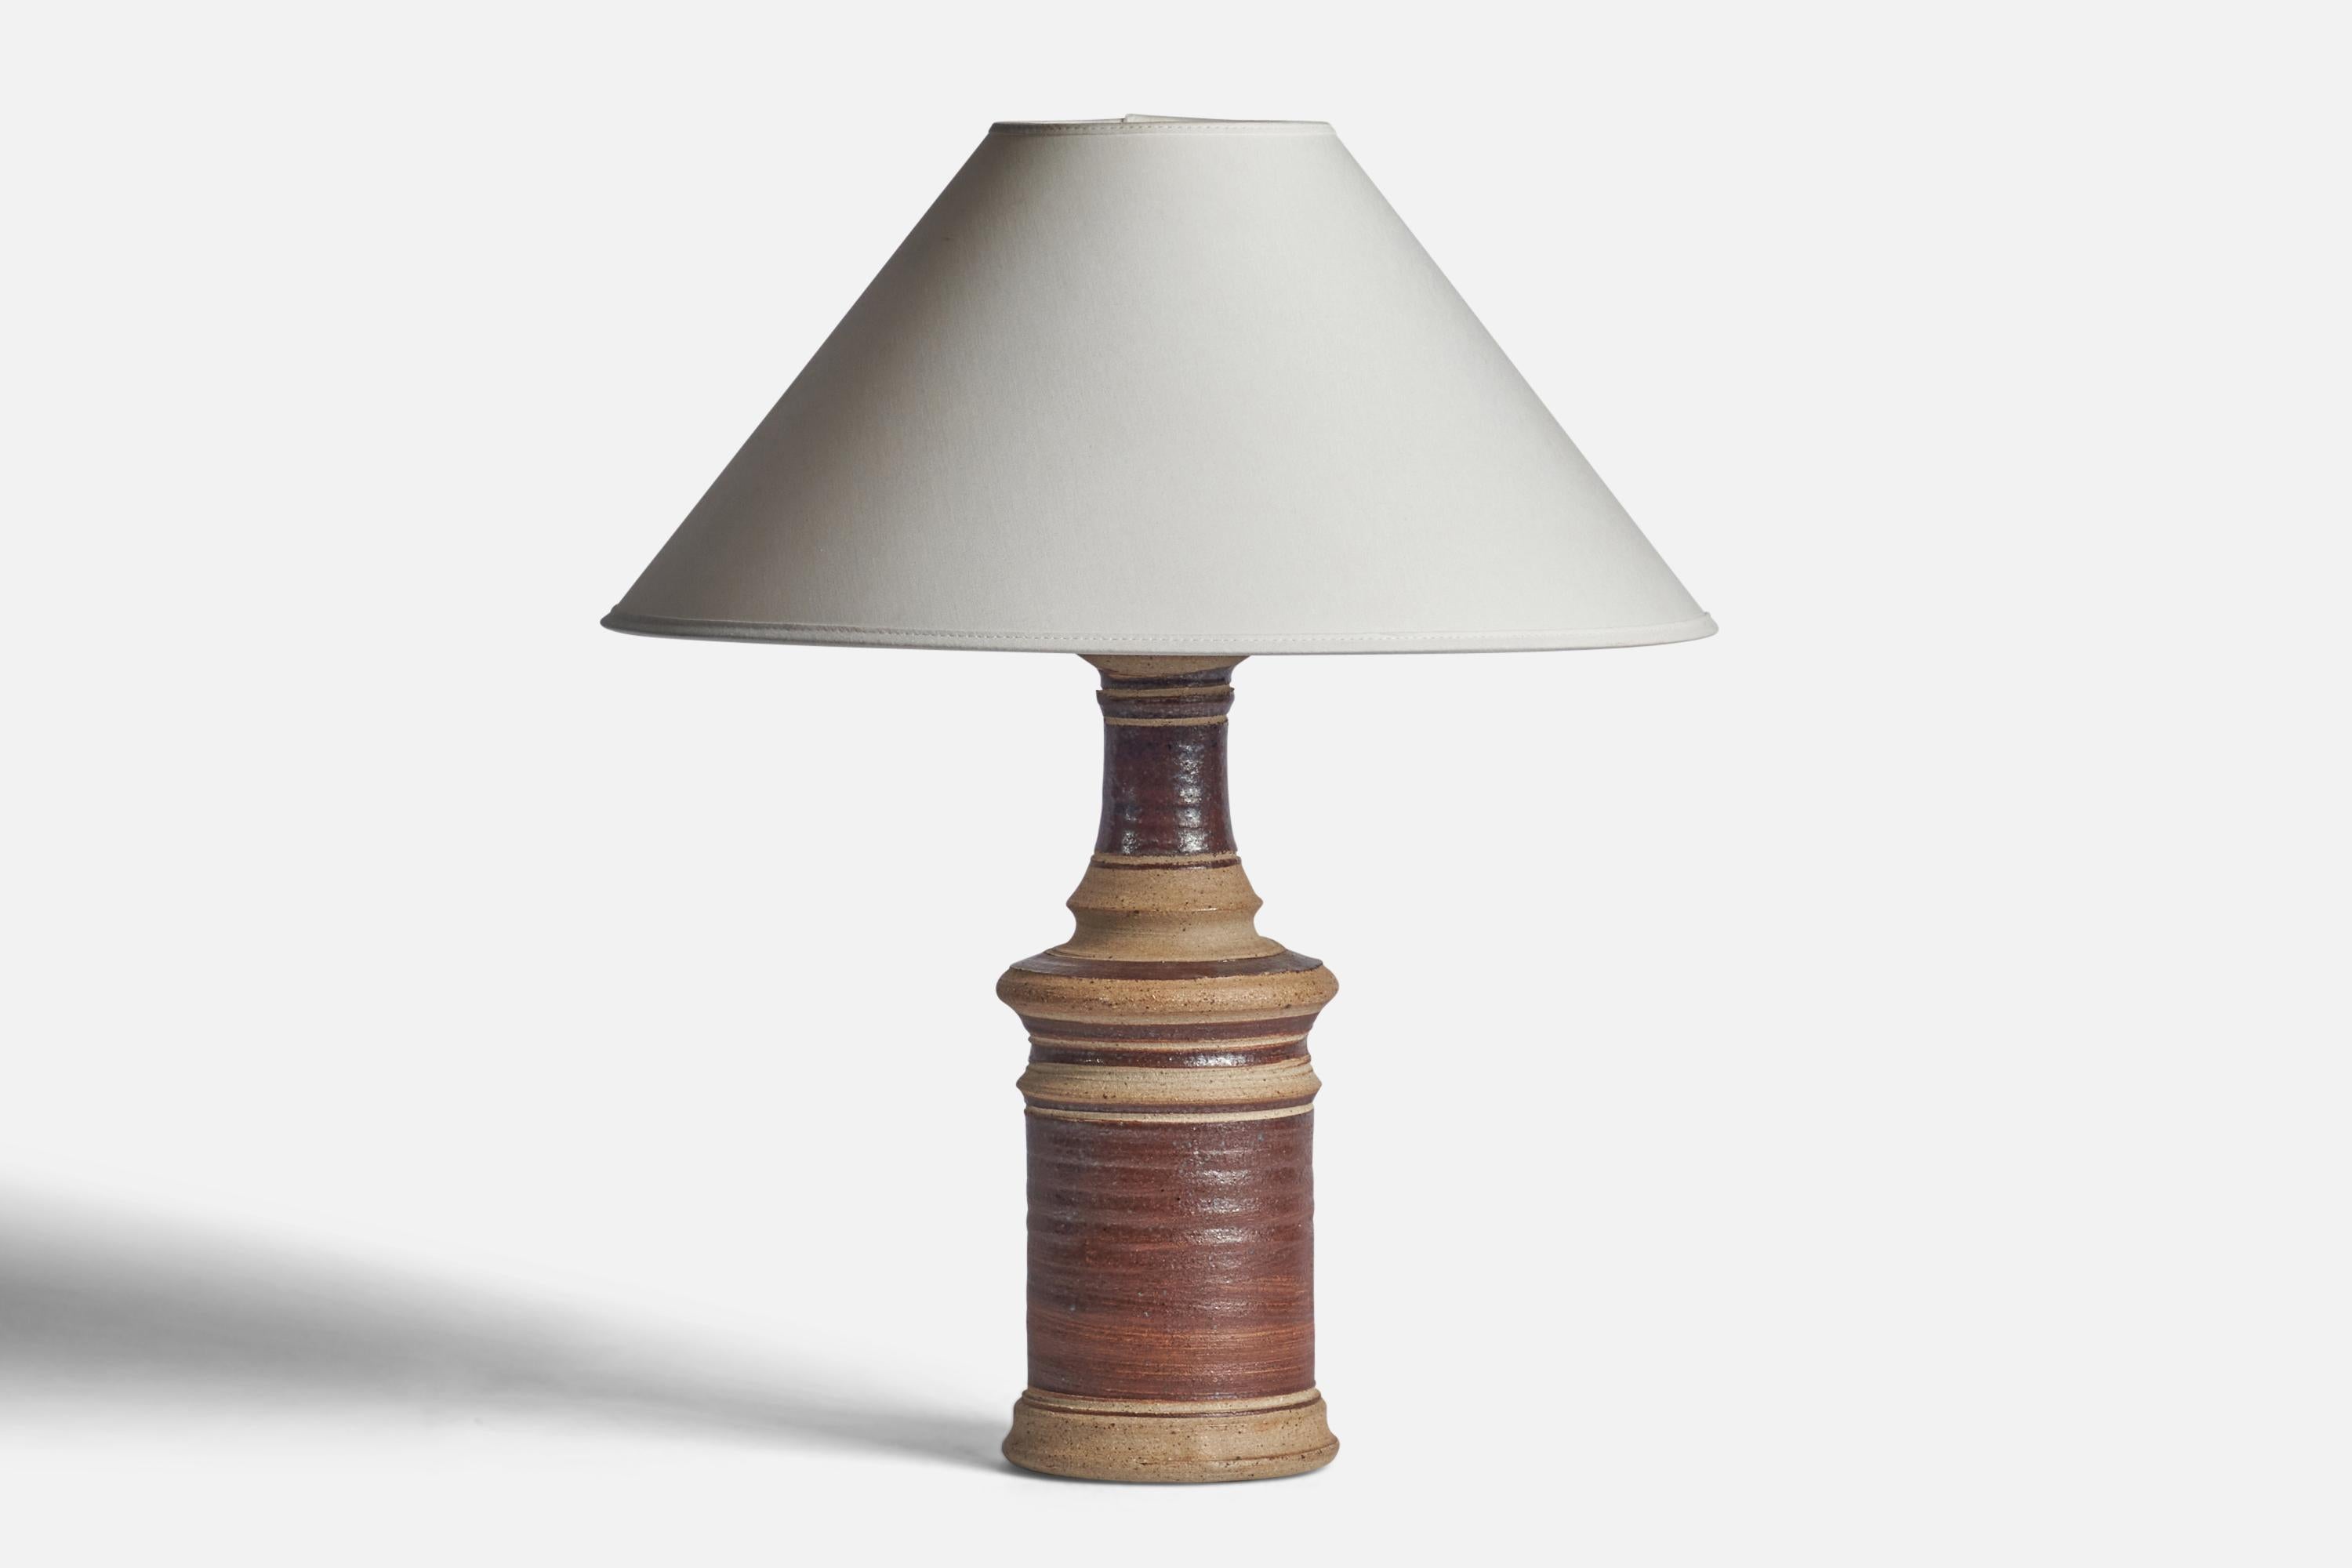 A beige and brown-glazed stoneware table lamp designed and produced in Denmark, 1960s.

Dimensions of Lamp (inches): 15” H x 5” Diameter
Dimensions of Shade (inches): 4.5” Top Diameter x 16” Bottom Diameter x 7.25” H
Dimensions of Lamp with Shade